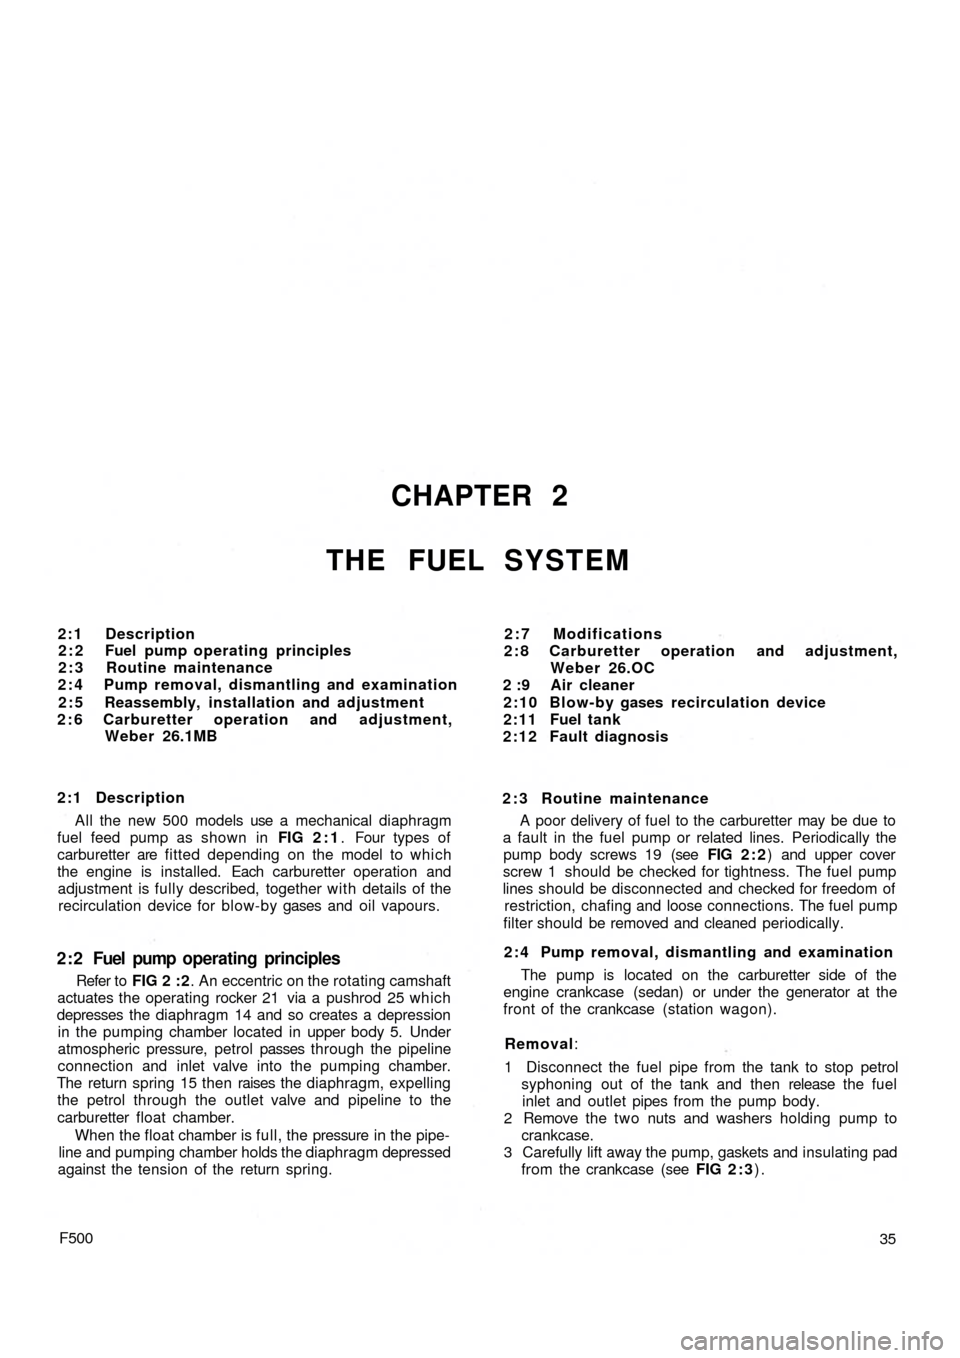 FIAT 500 1957 1.G Workshop Manual CHAPTER 2
THE FUEL SYSTEM
2:1 Description
2 : 2 Fuel pump operating principles
2 : 3 Routine maintenance
2 : 4 Pump removal, dismantling and examination
2 : 5 Reassembly, installation and adjustment
2